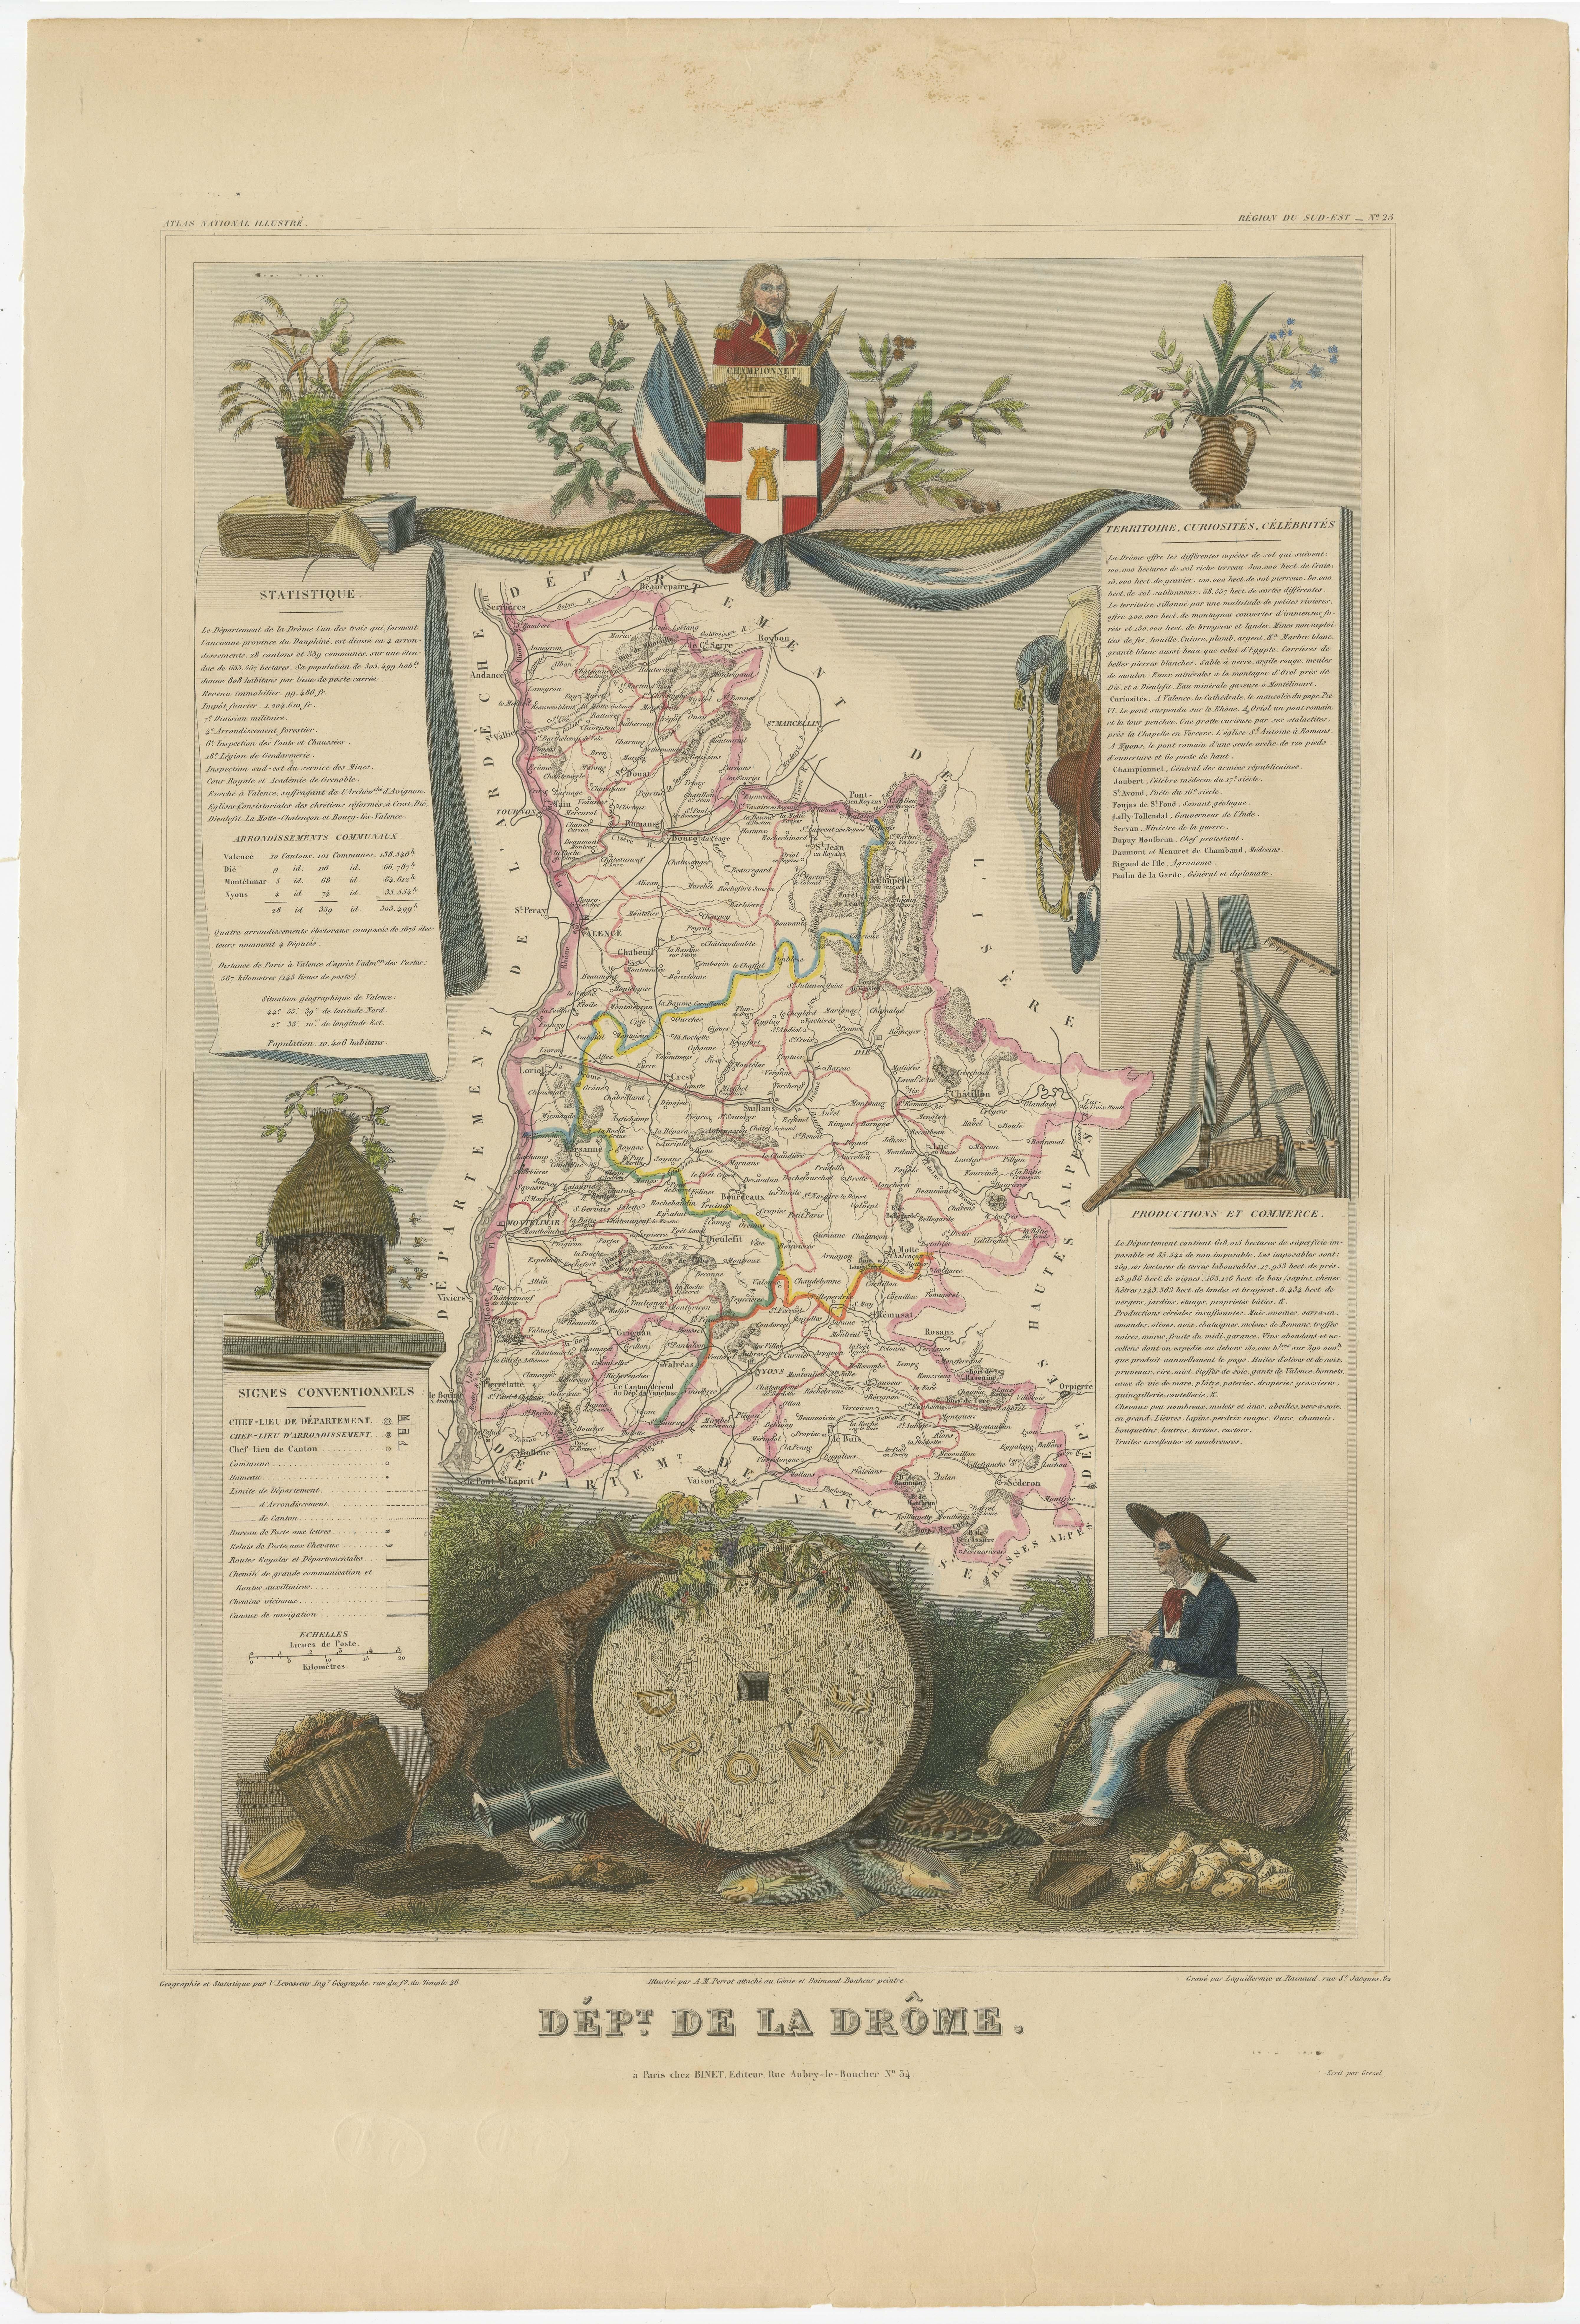 Antique map titled 'Dépt. de la Drôme'. Map of the French department of Drôme, France. This area is known for its production of Picodon, a spicy goats-milk cheese. The whole is surrounded by elaborate decorative engravings designed to illustrate